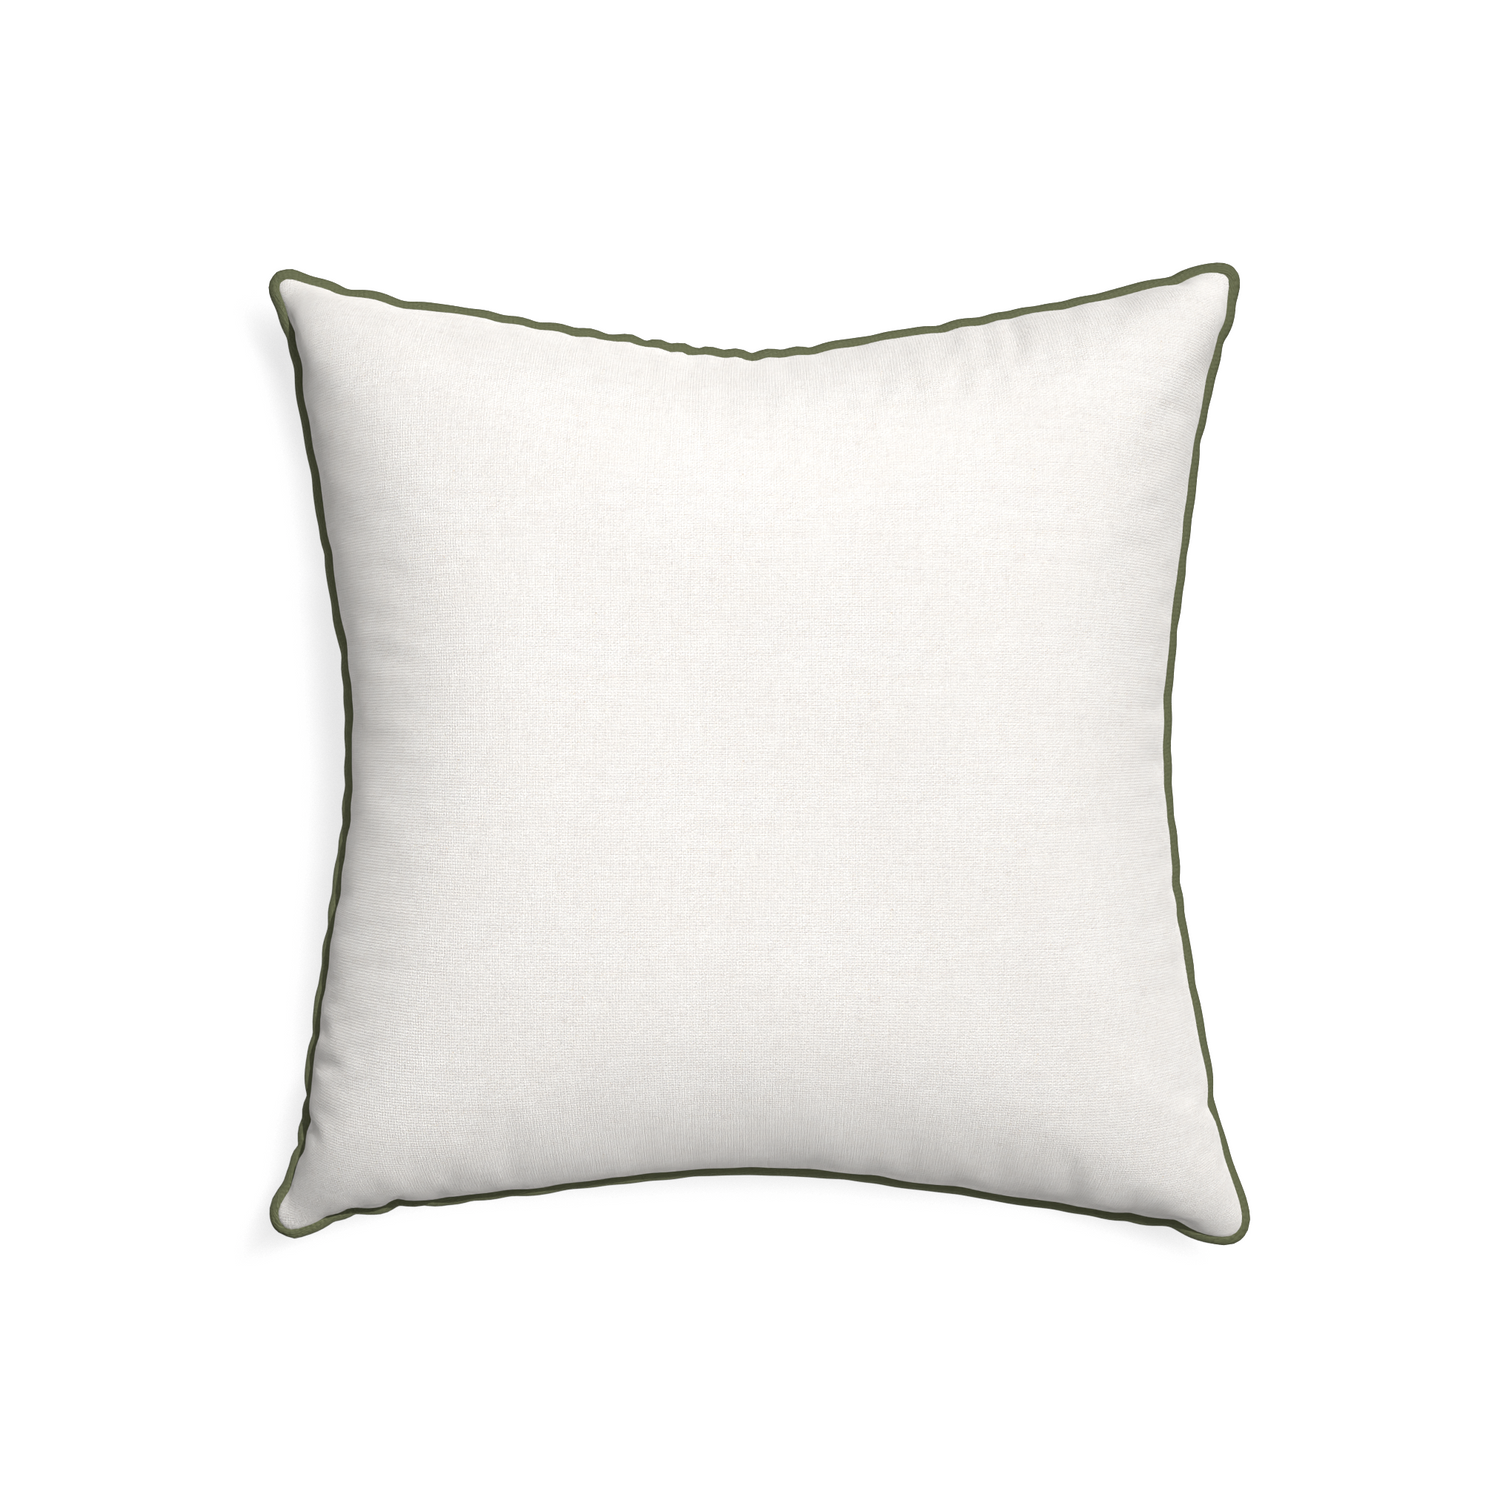 22-square flour custom pillow with f piping on white background